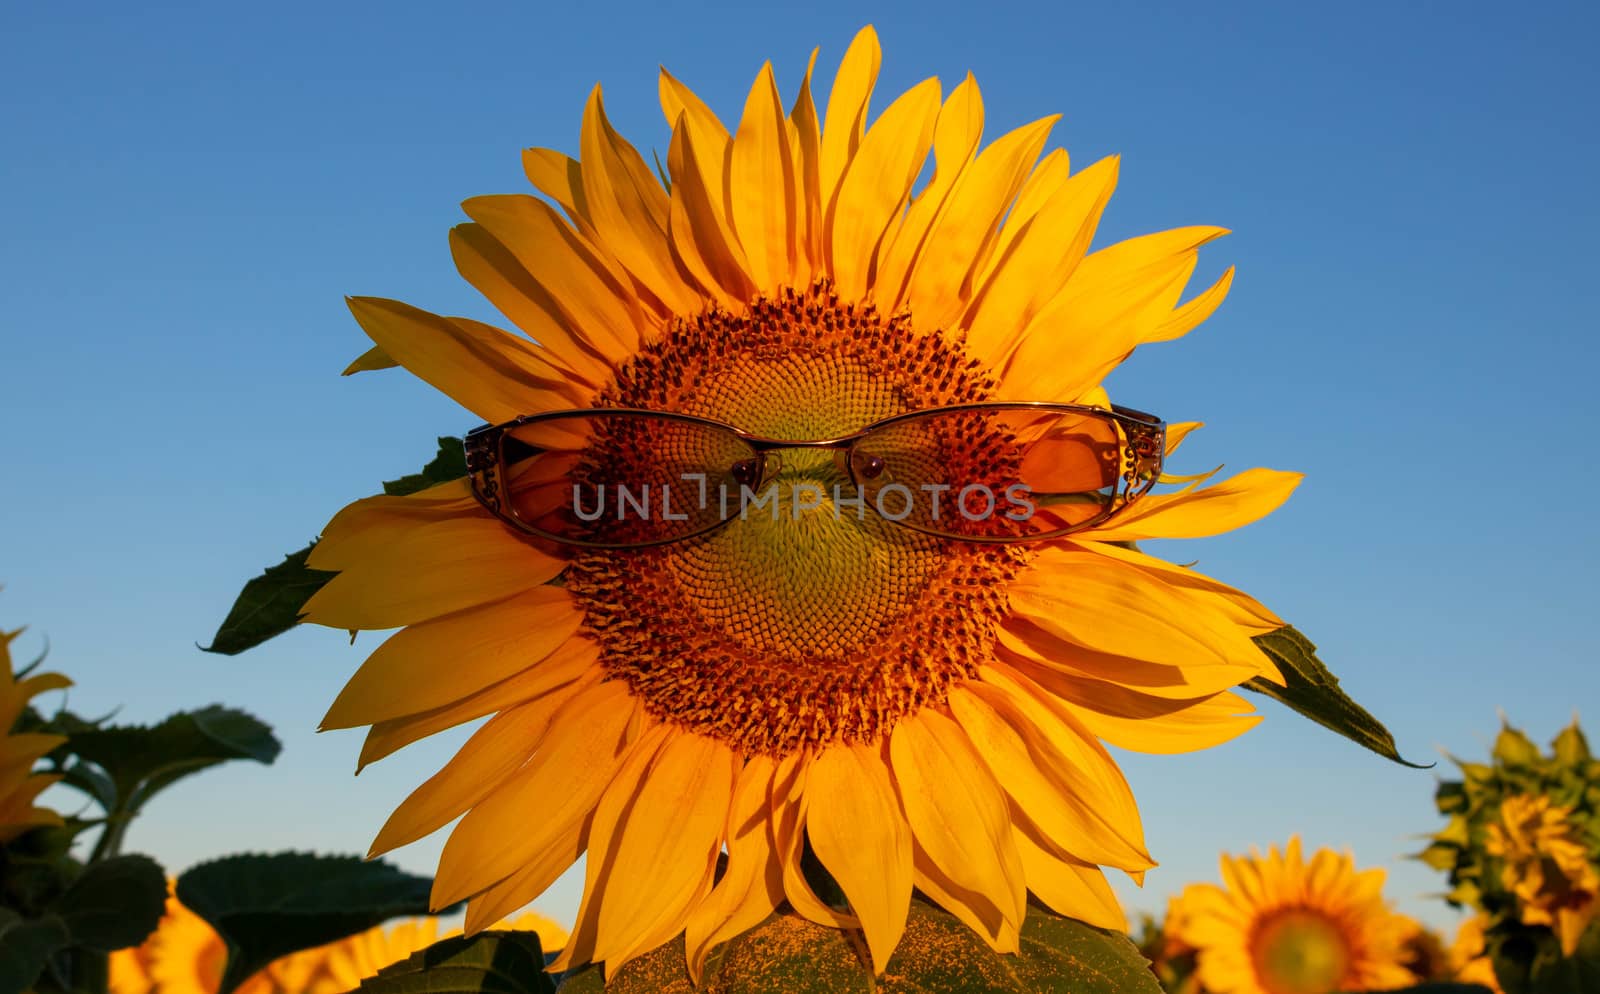 Sunflower with glasses on a blue sky background.